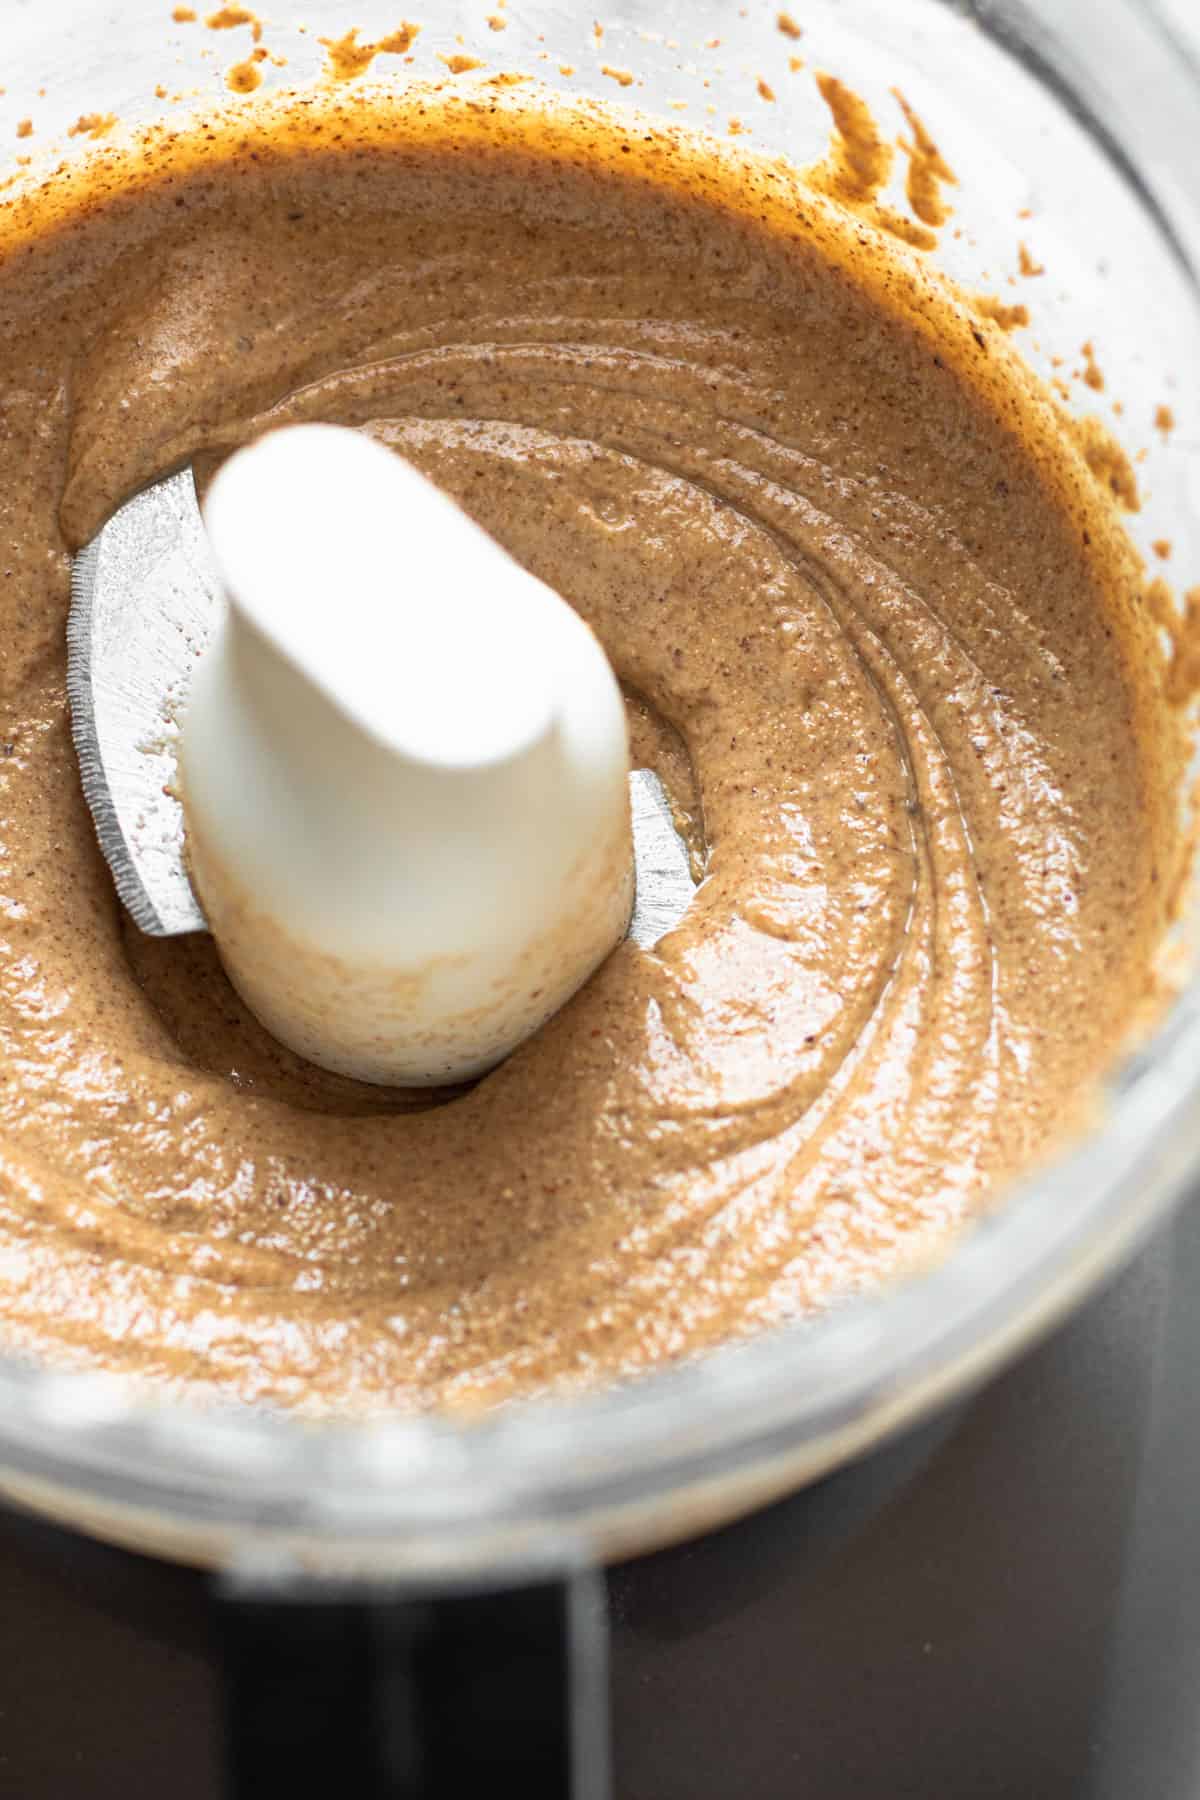 Creamy and thick homemade almond butter in a food processor.